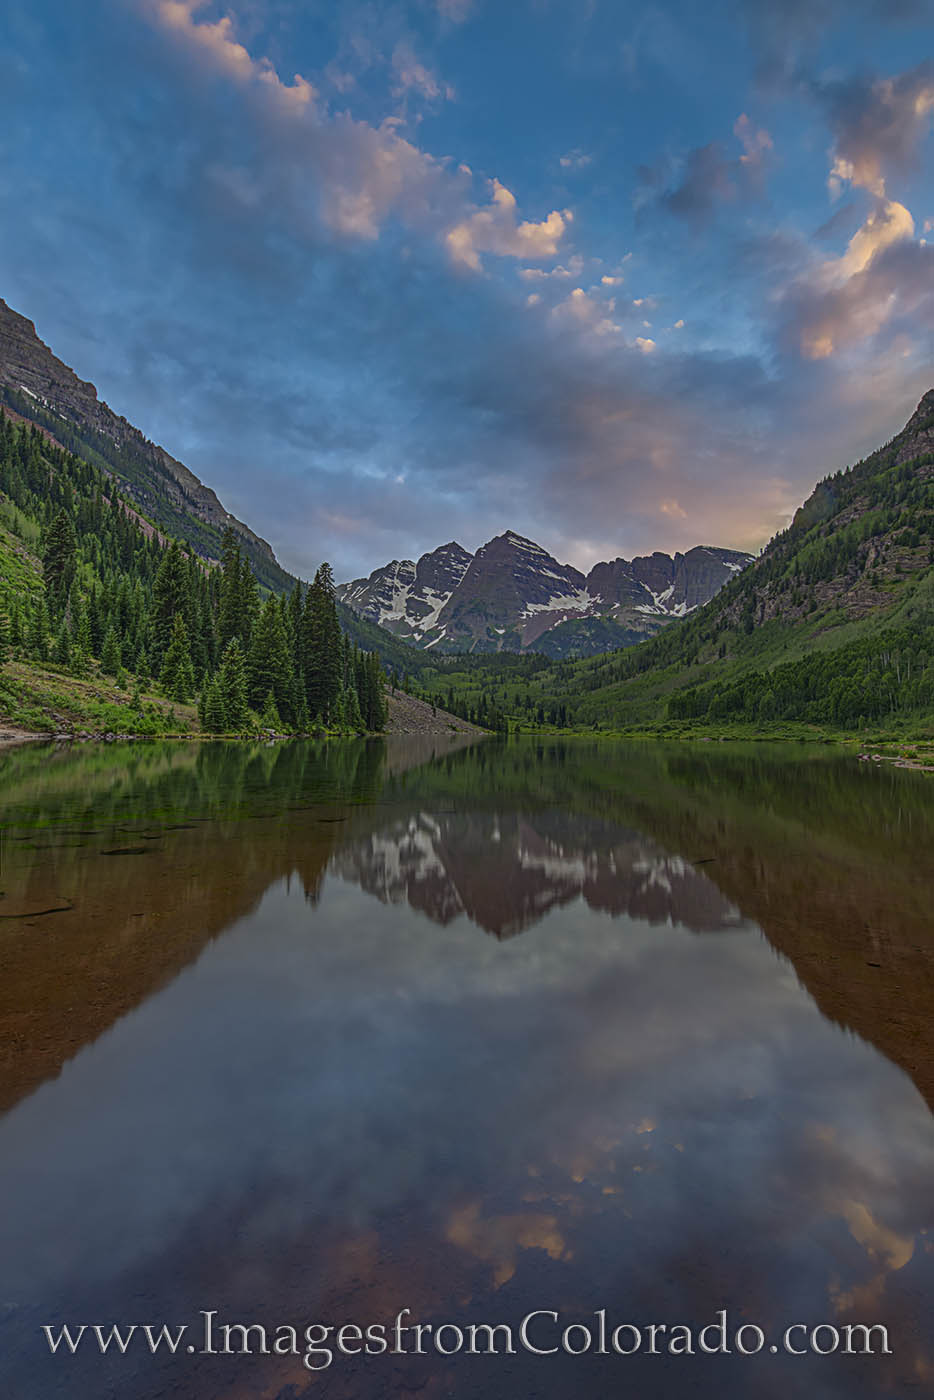 The Maroon Bells has been photographed more than any other place in Colorado, and for good reason. Maroon Lake makes the perfect...